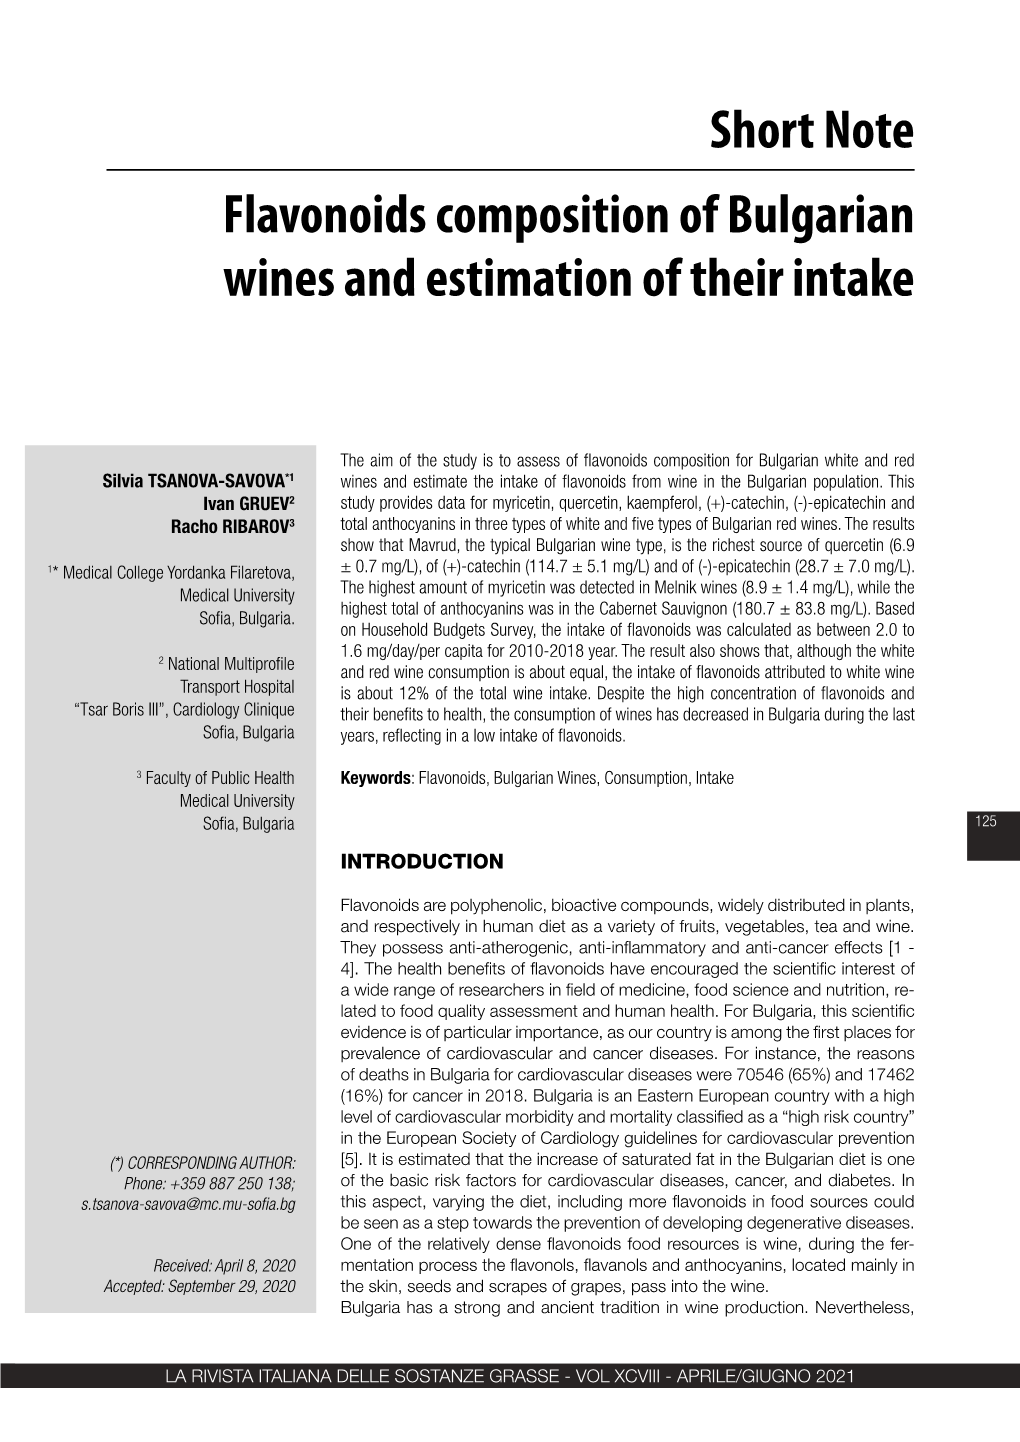 Flavonoids Composition of Bulgarian Wines and Estimation of Their Intake